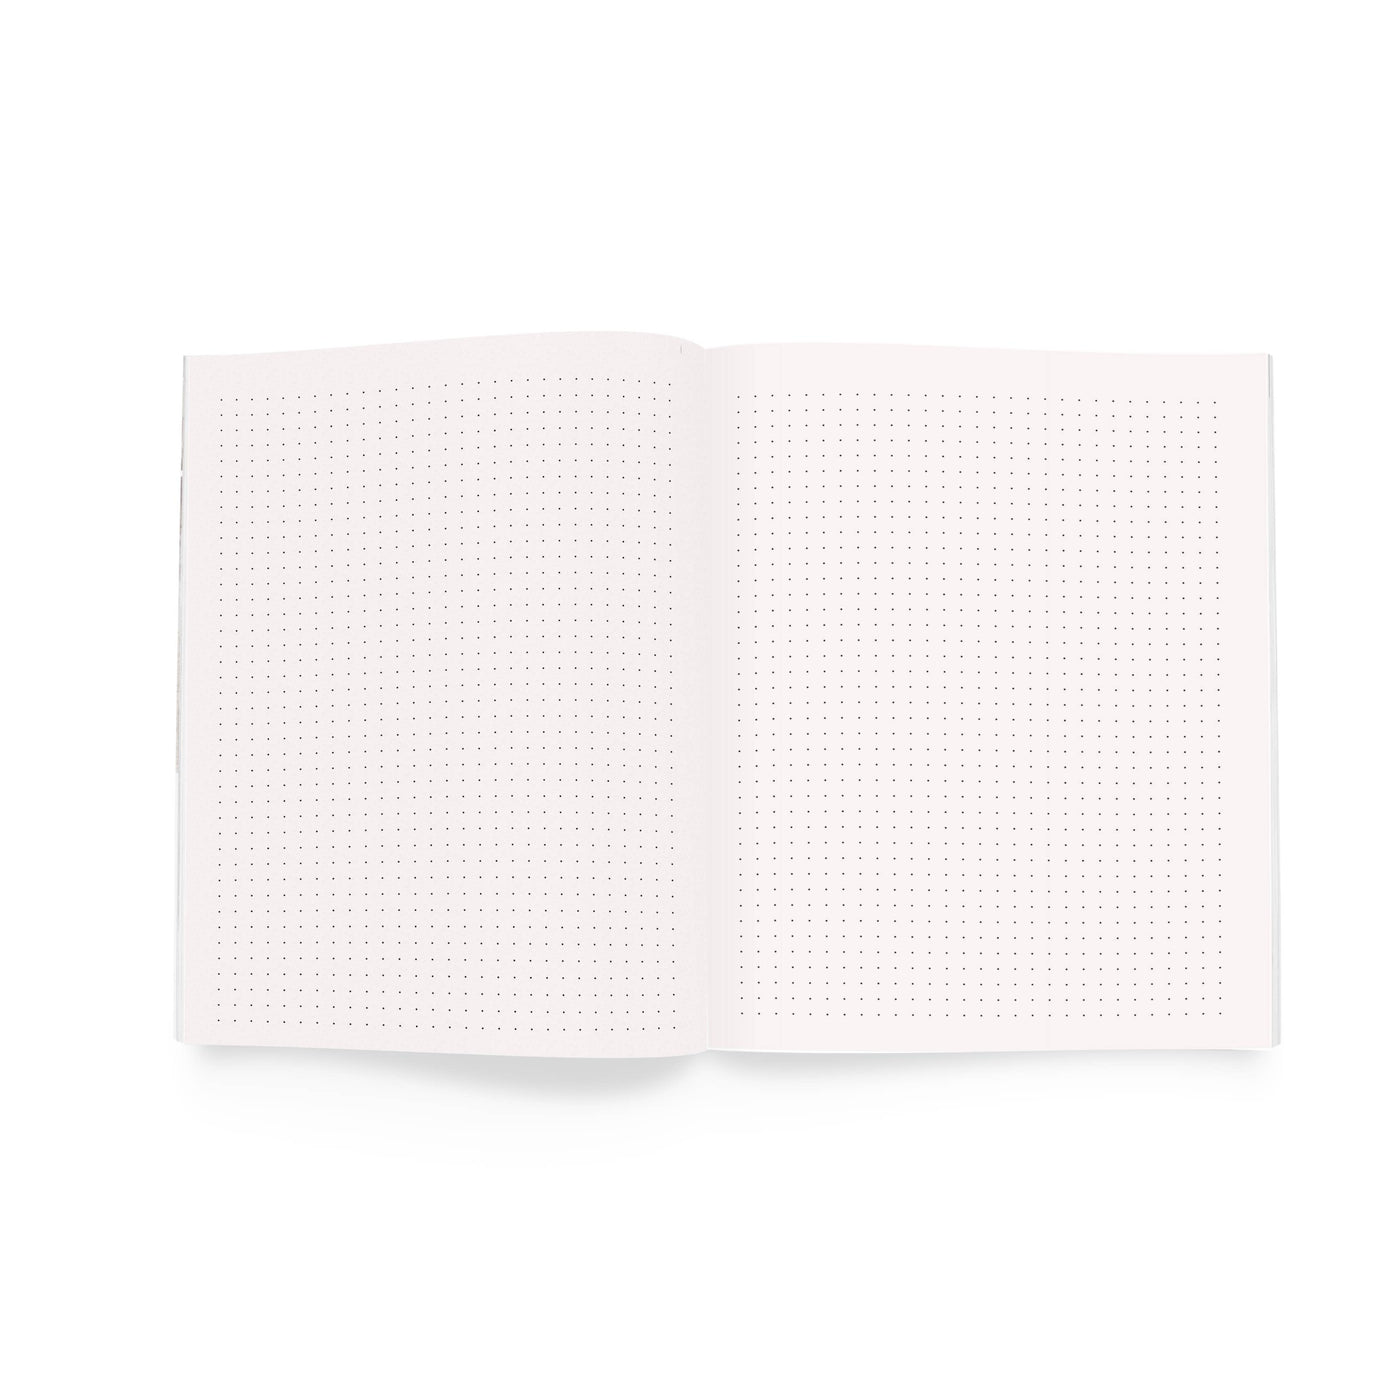 blank dotted pages inside undated planner